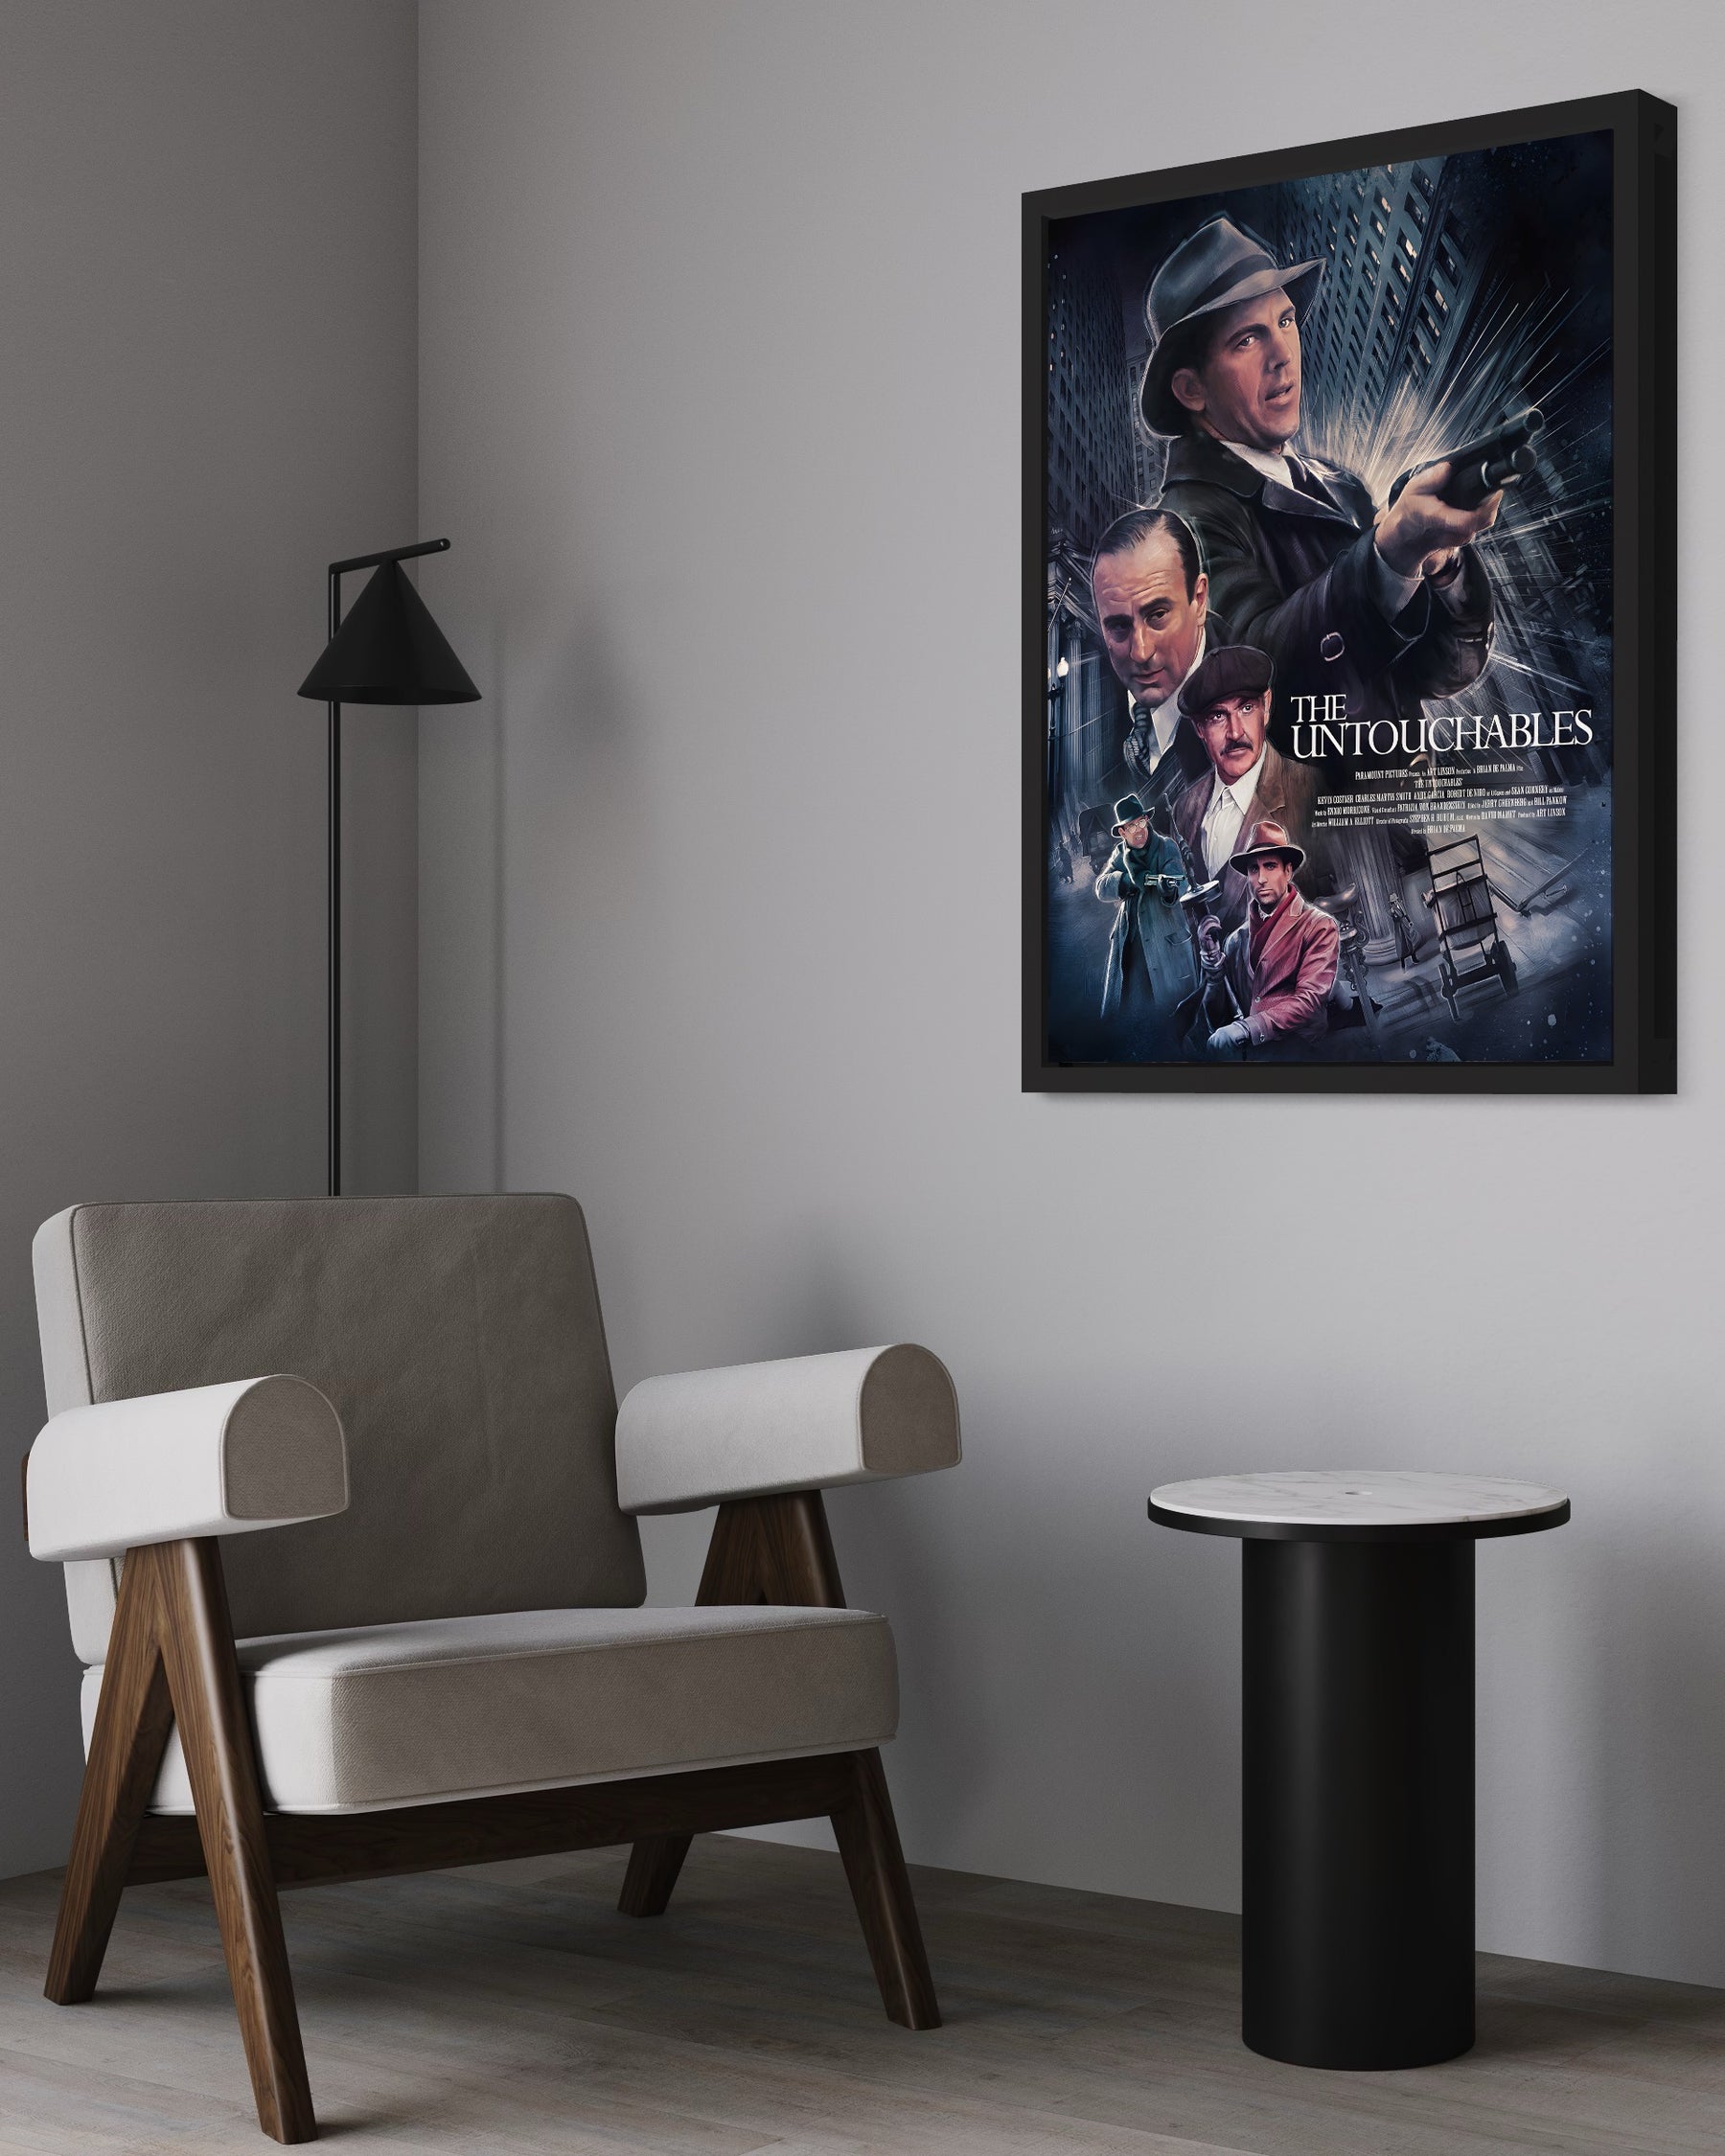 The Untouchables wall art